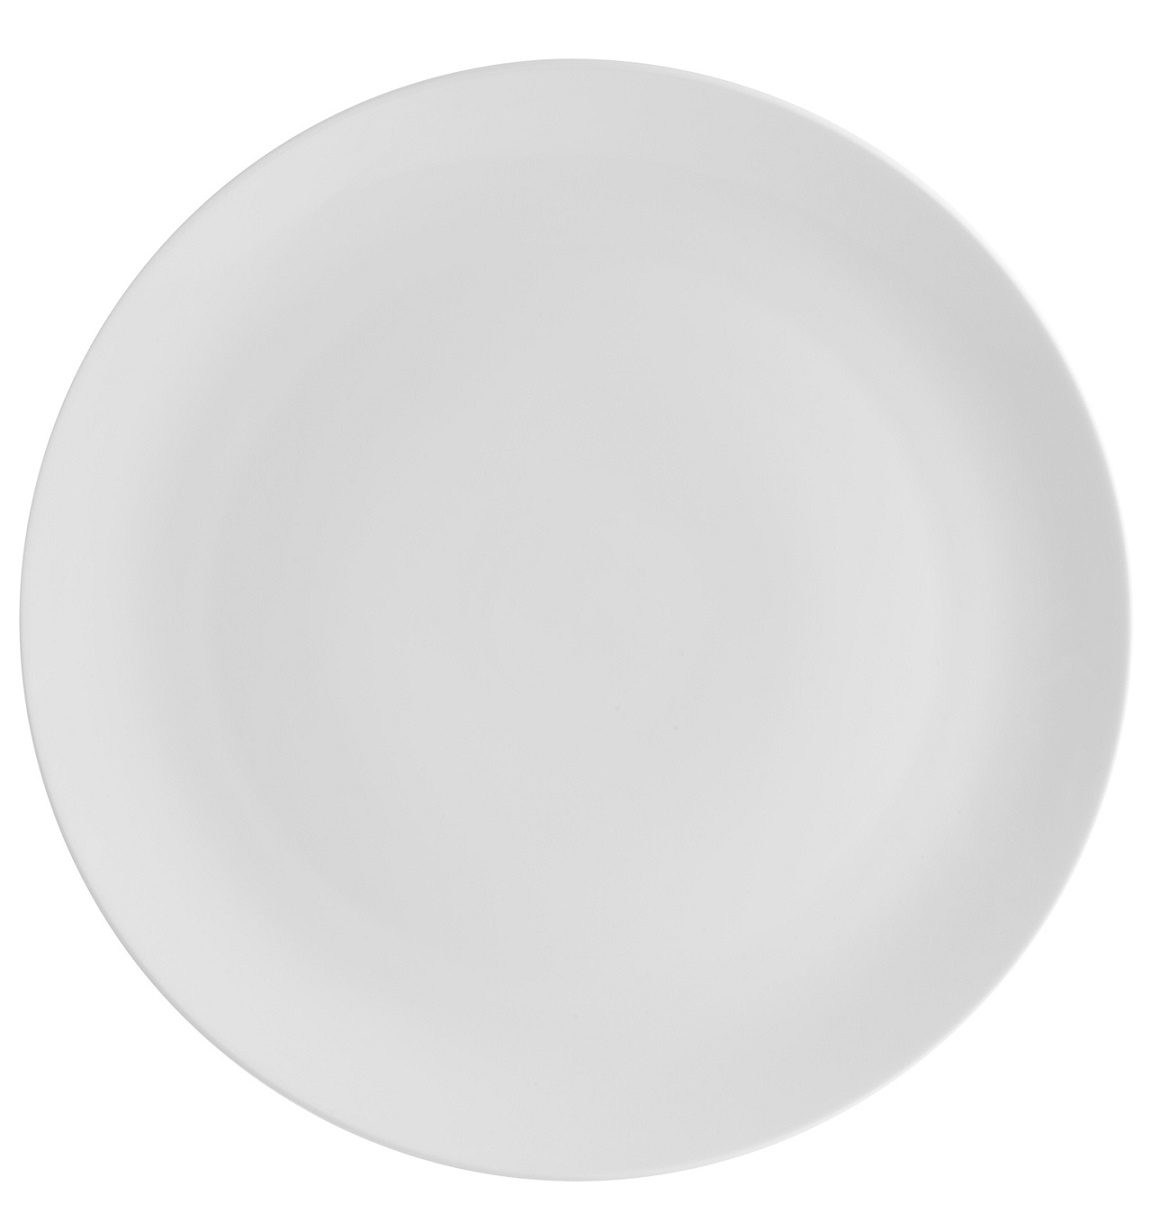 dinner plate collection Brodway White by Vista Alegre